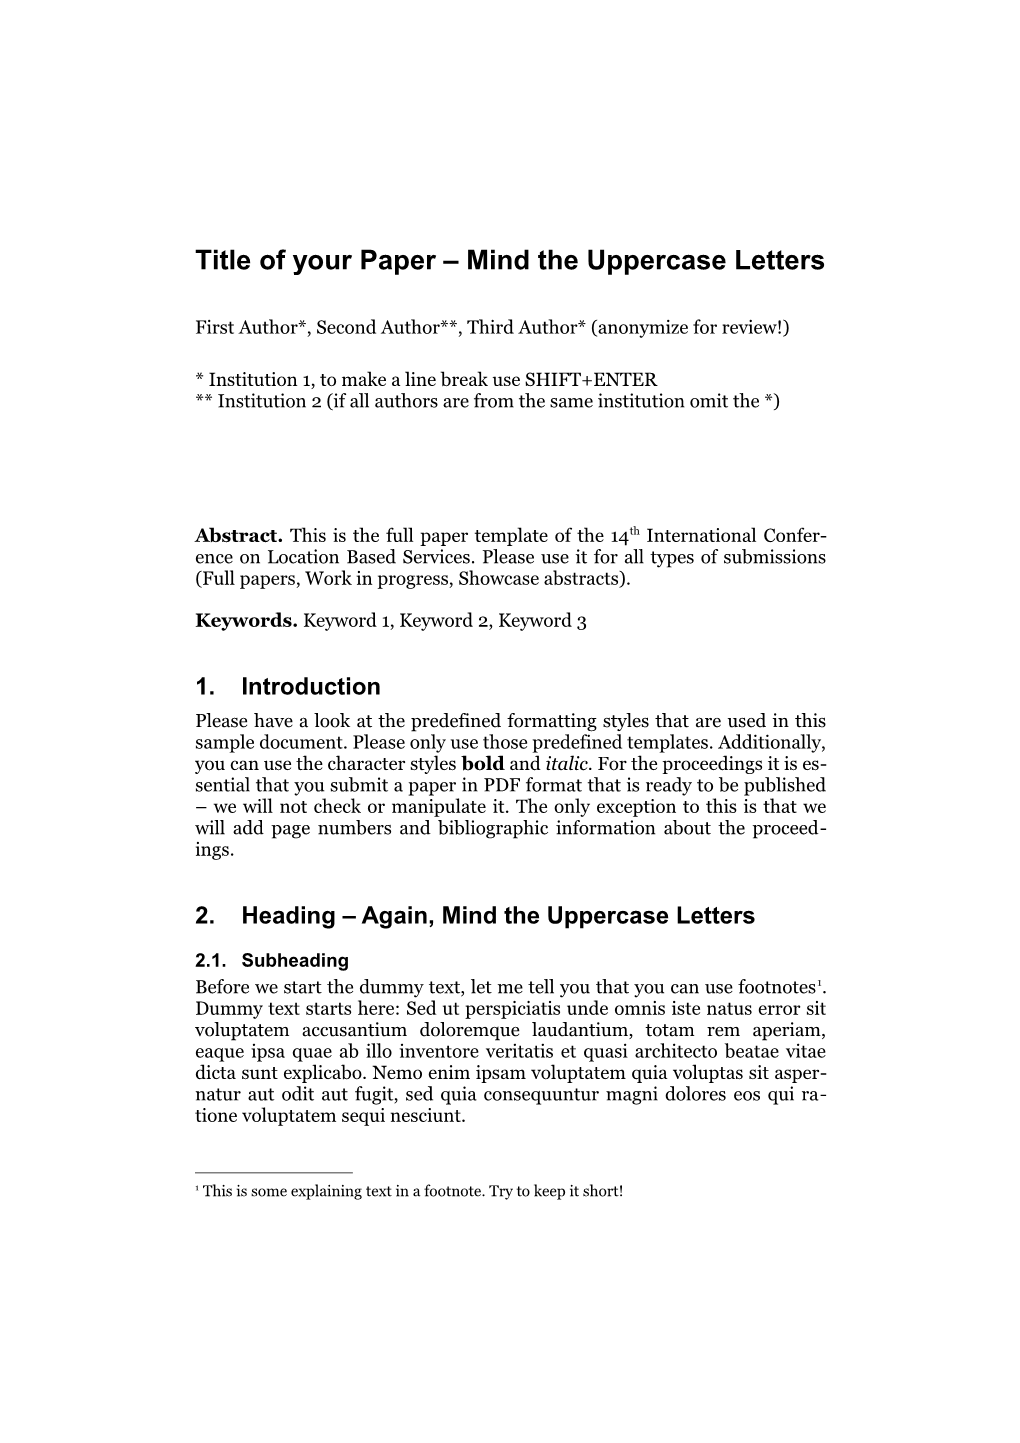 Title of Your Paper Mind the Uppercase Letters s1